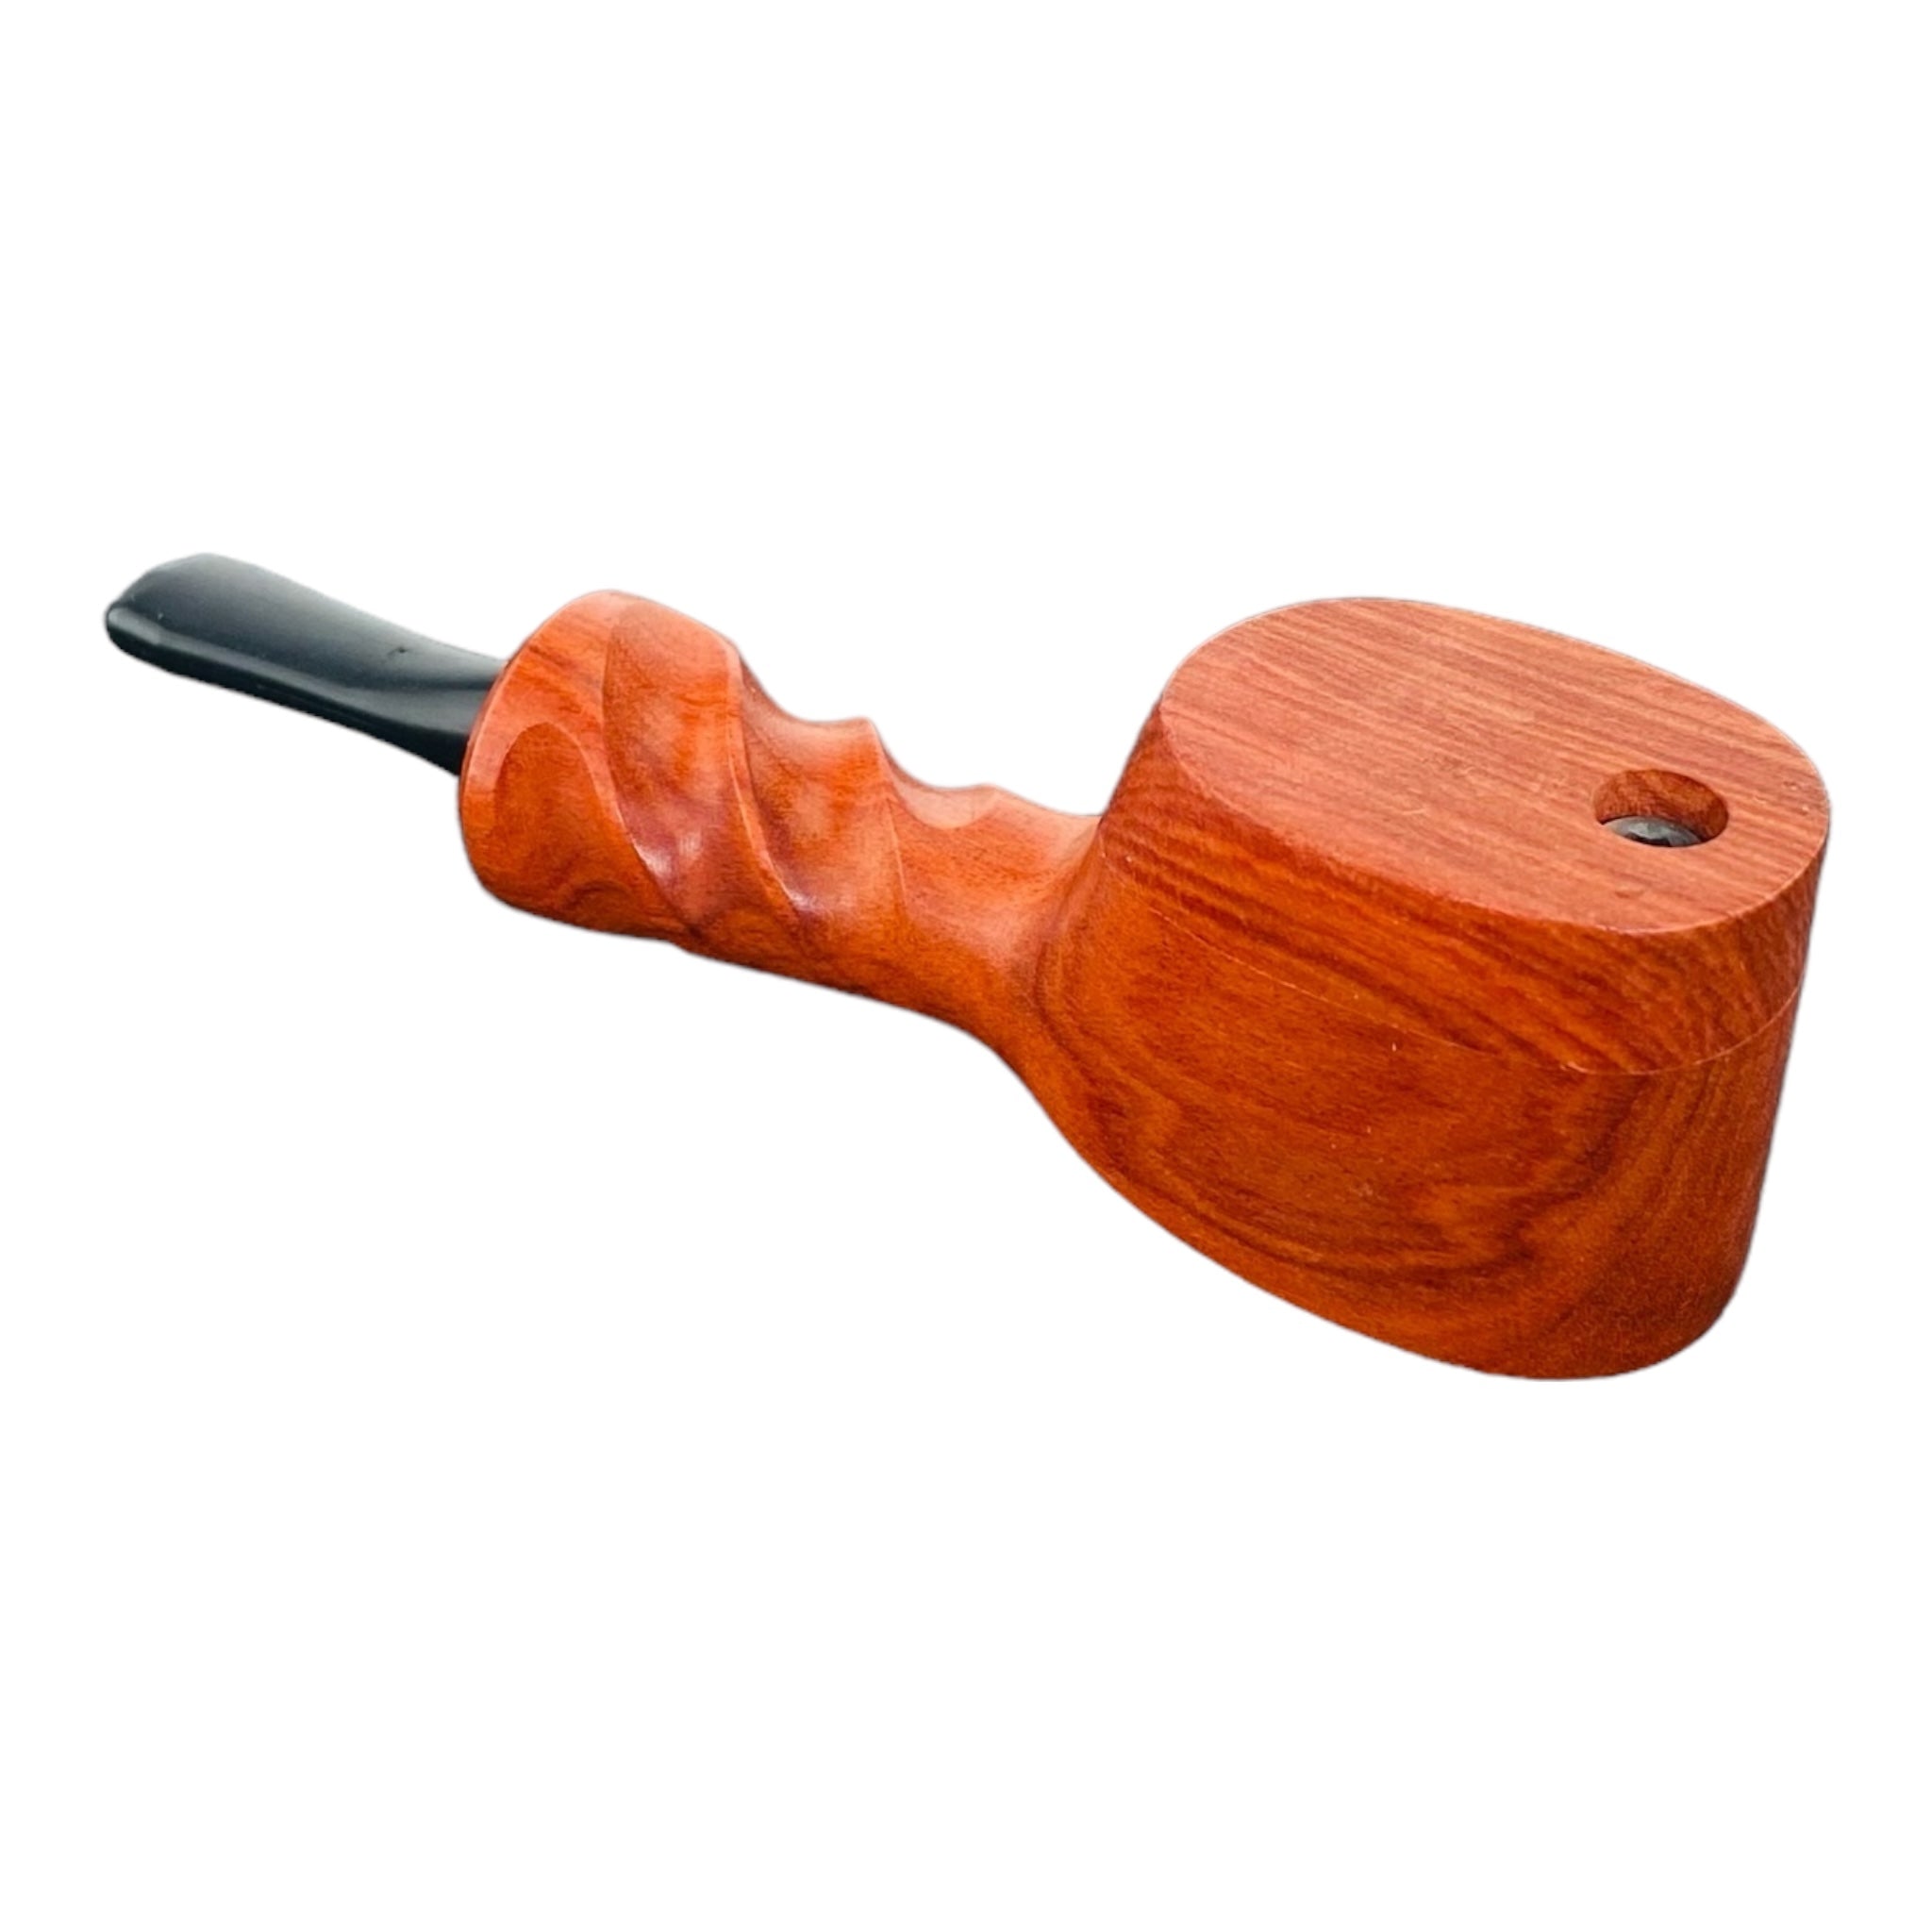 Wood Hand Pipe - Twsited Stem Wood Pipe With Lid